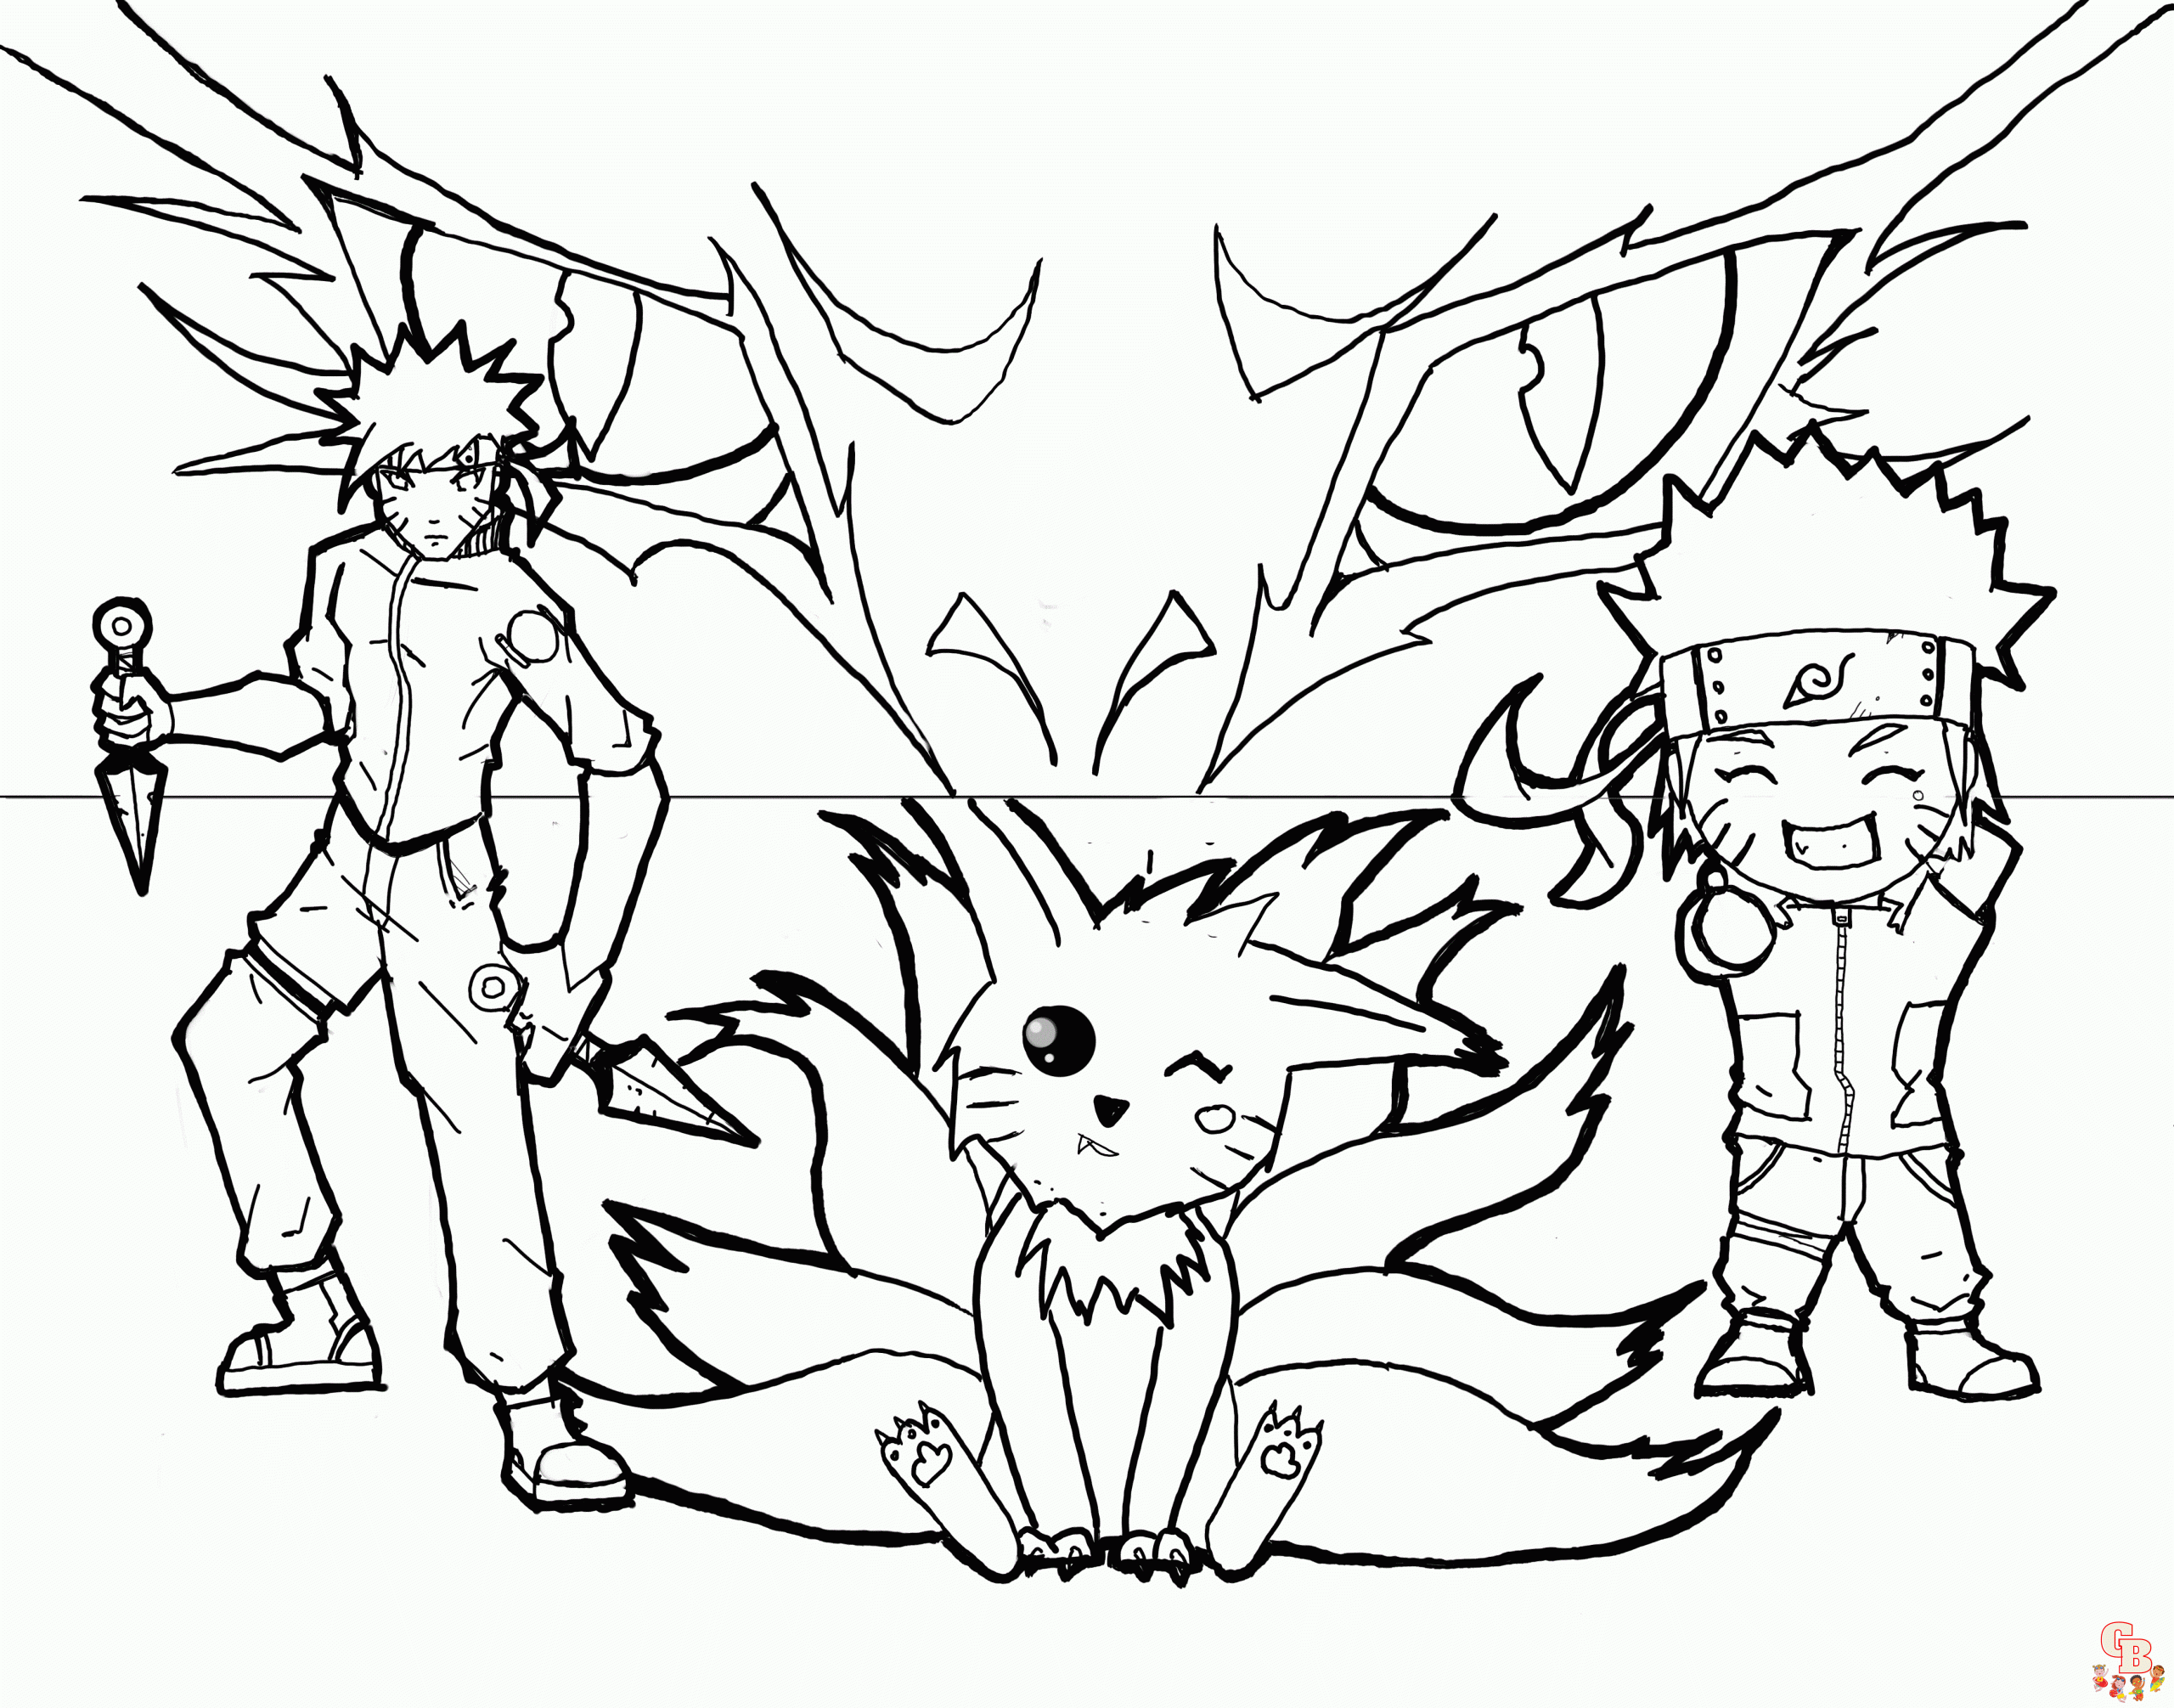 Nine Tailed Fox Coloring Pages - Free Printable and Easy